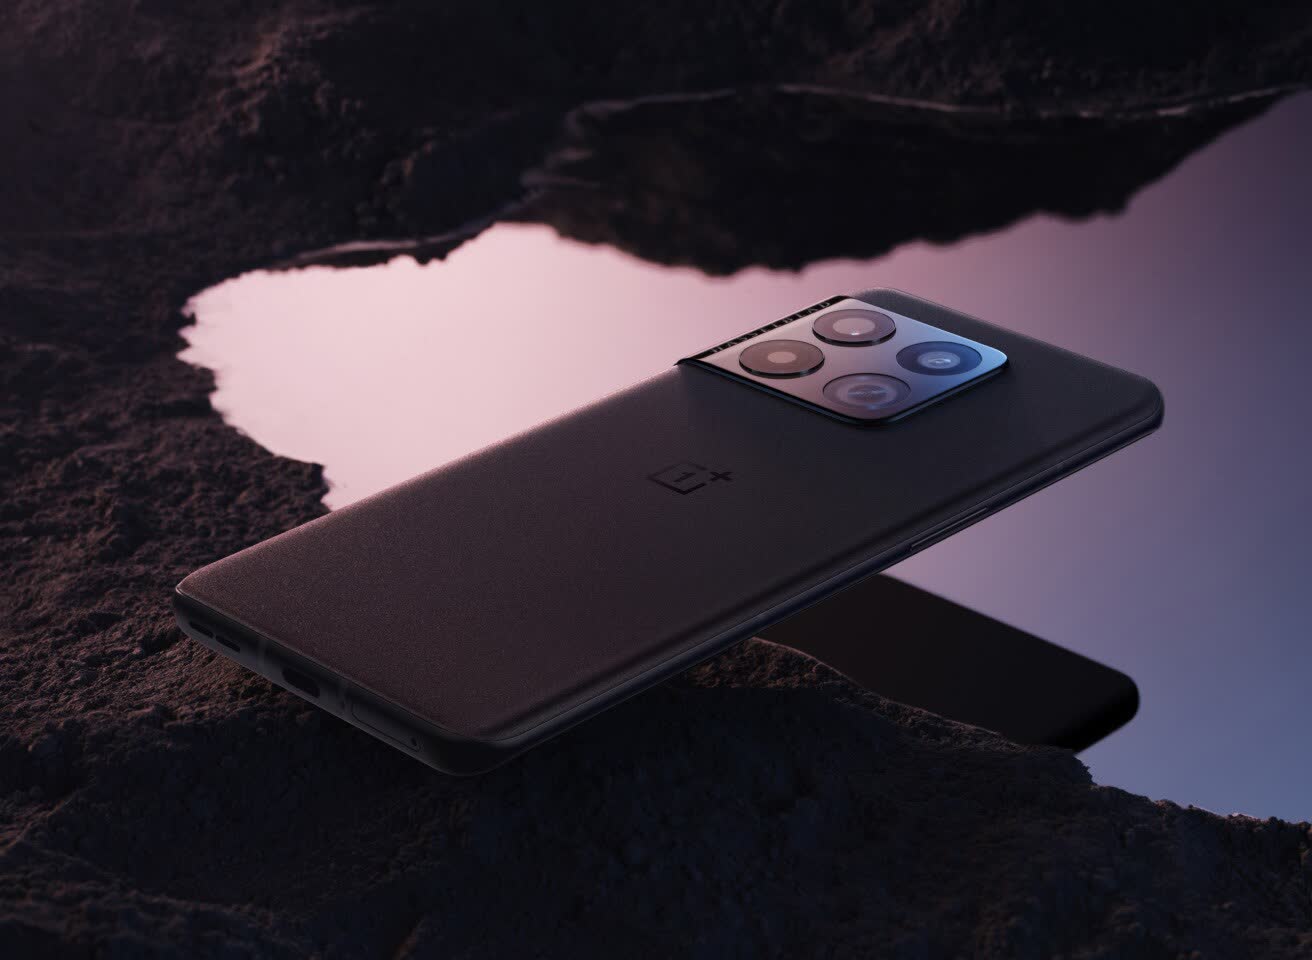 OnePlus 10 Pro debuts with the latest Qualcomm chipset, second-gen LTPO display, and 80W wired charging